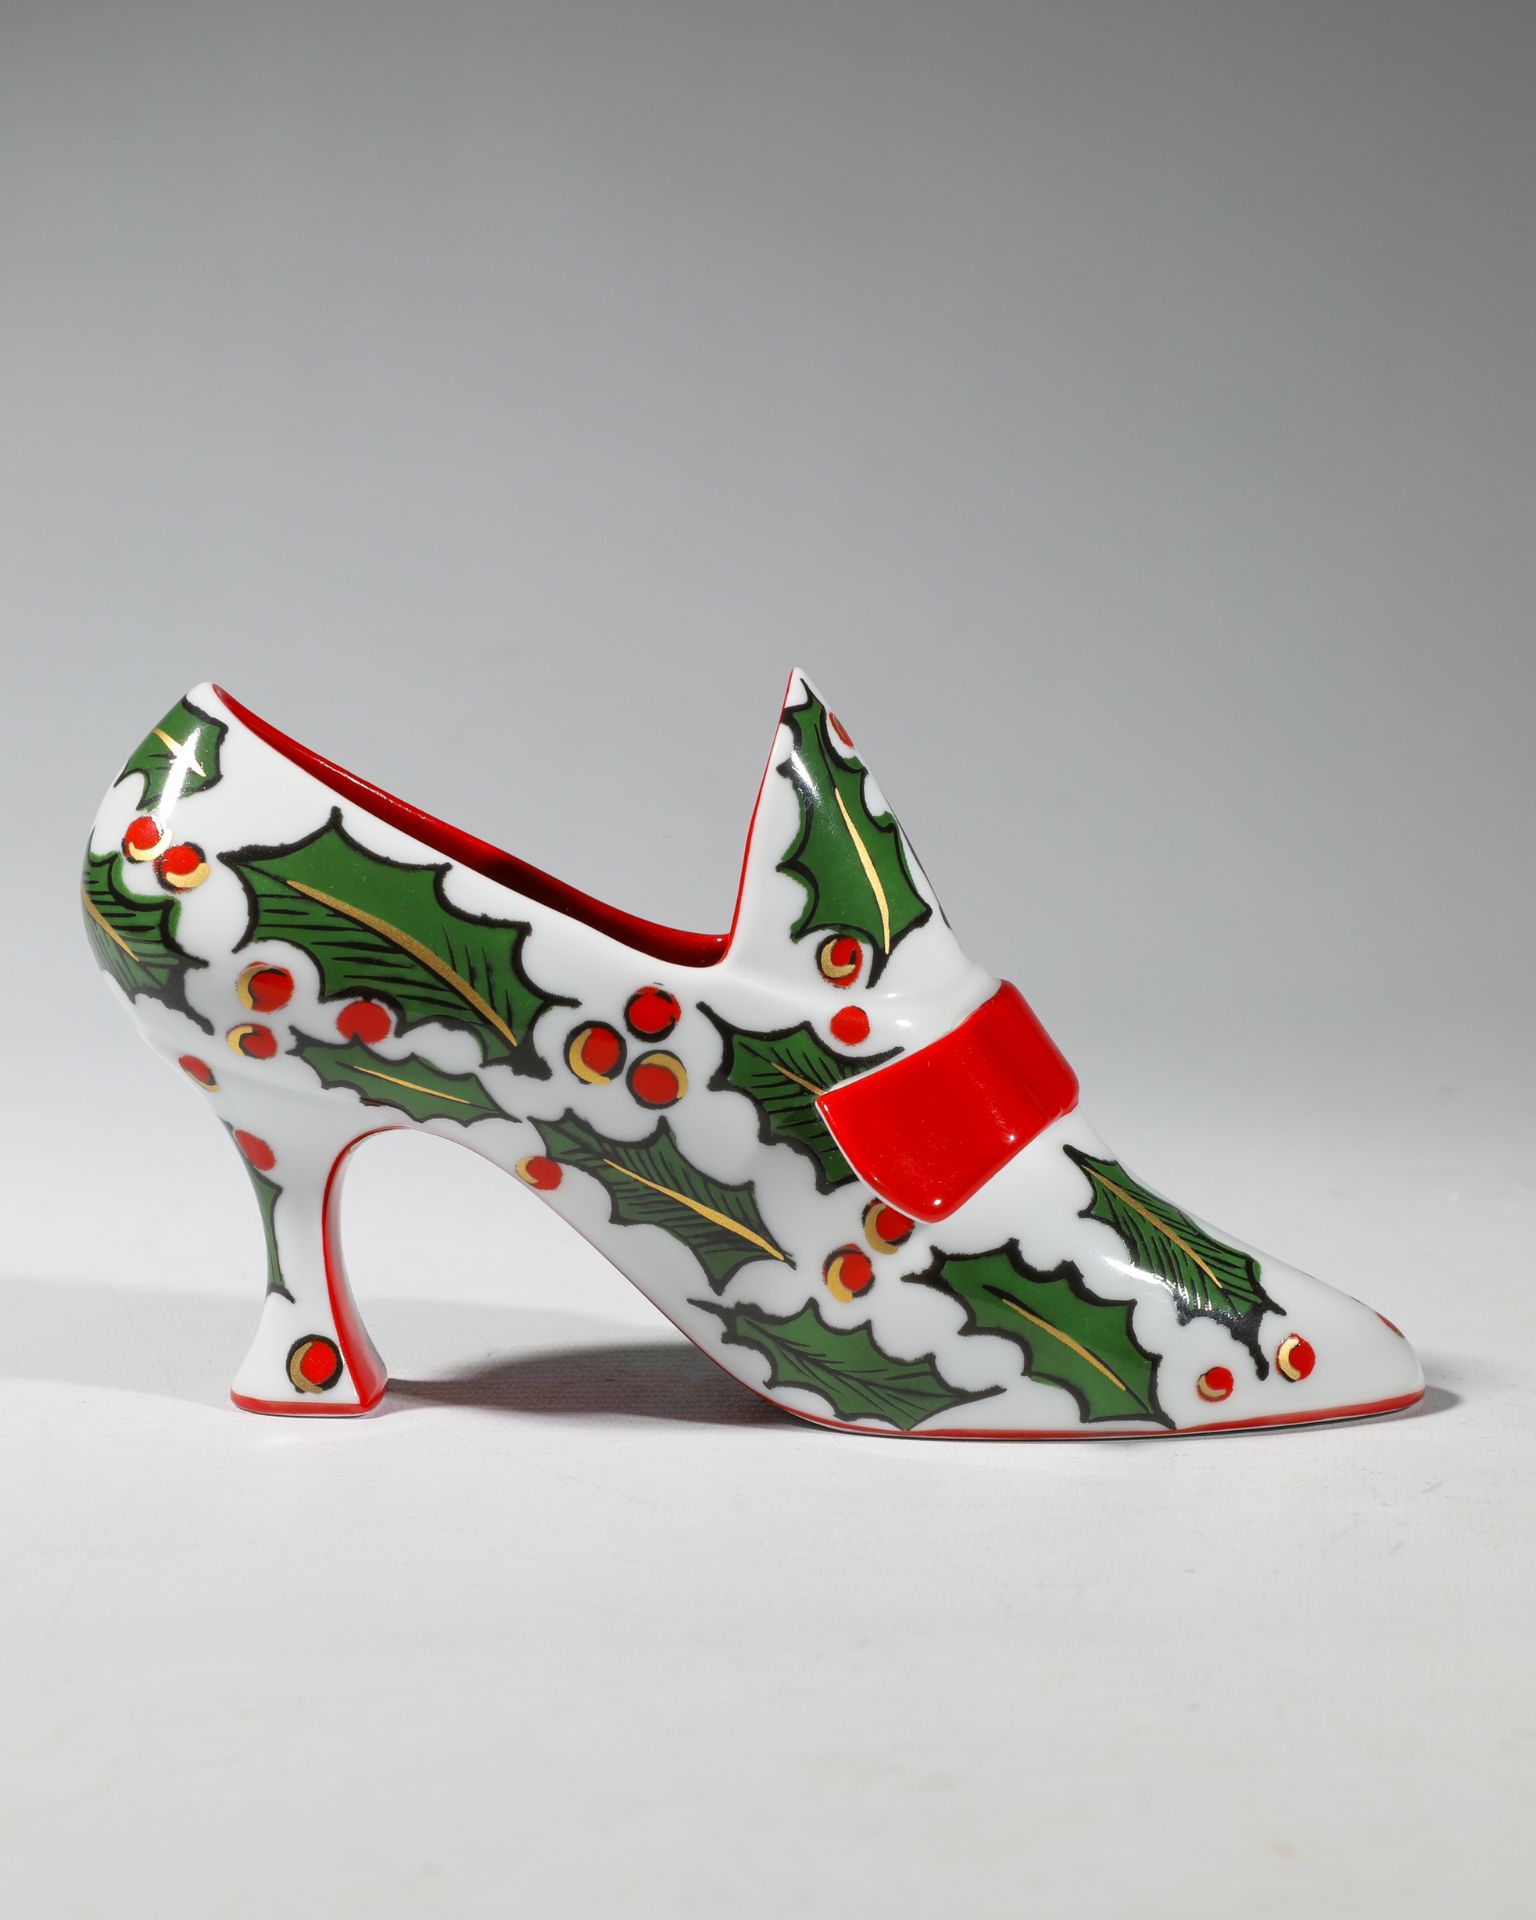 Rosenthal after Andy Warhol, Andy's Merry Christmas 'shoe', Ex. 39/99 - Image 2 of 4